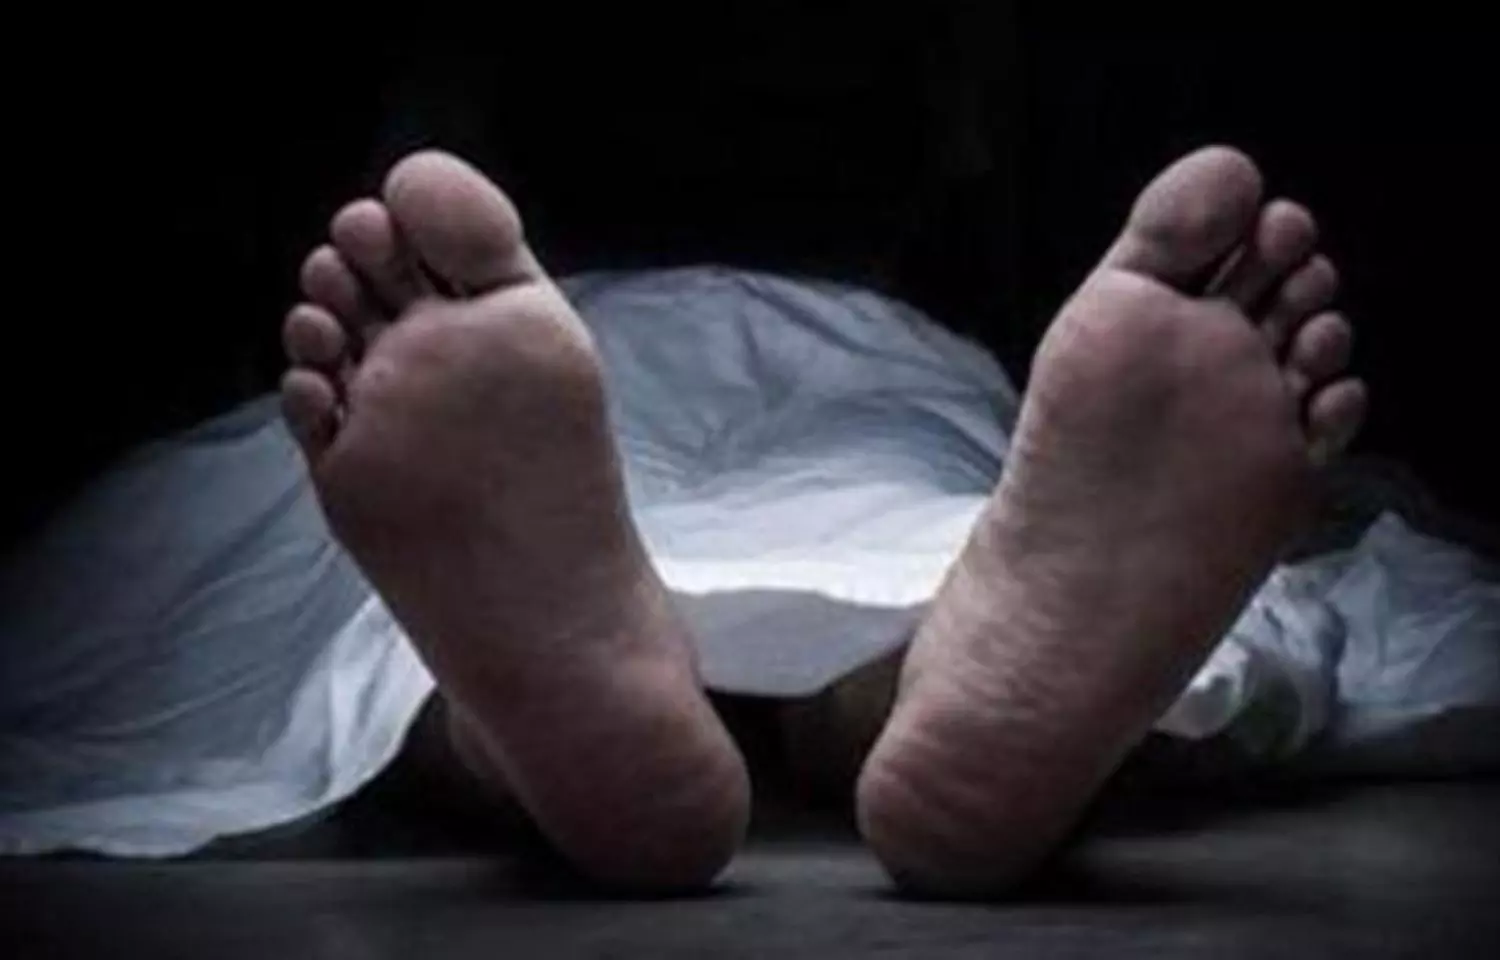 Kerala: 3rd year MBBS student drowns in stream